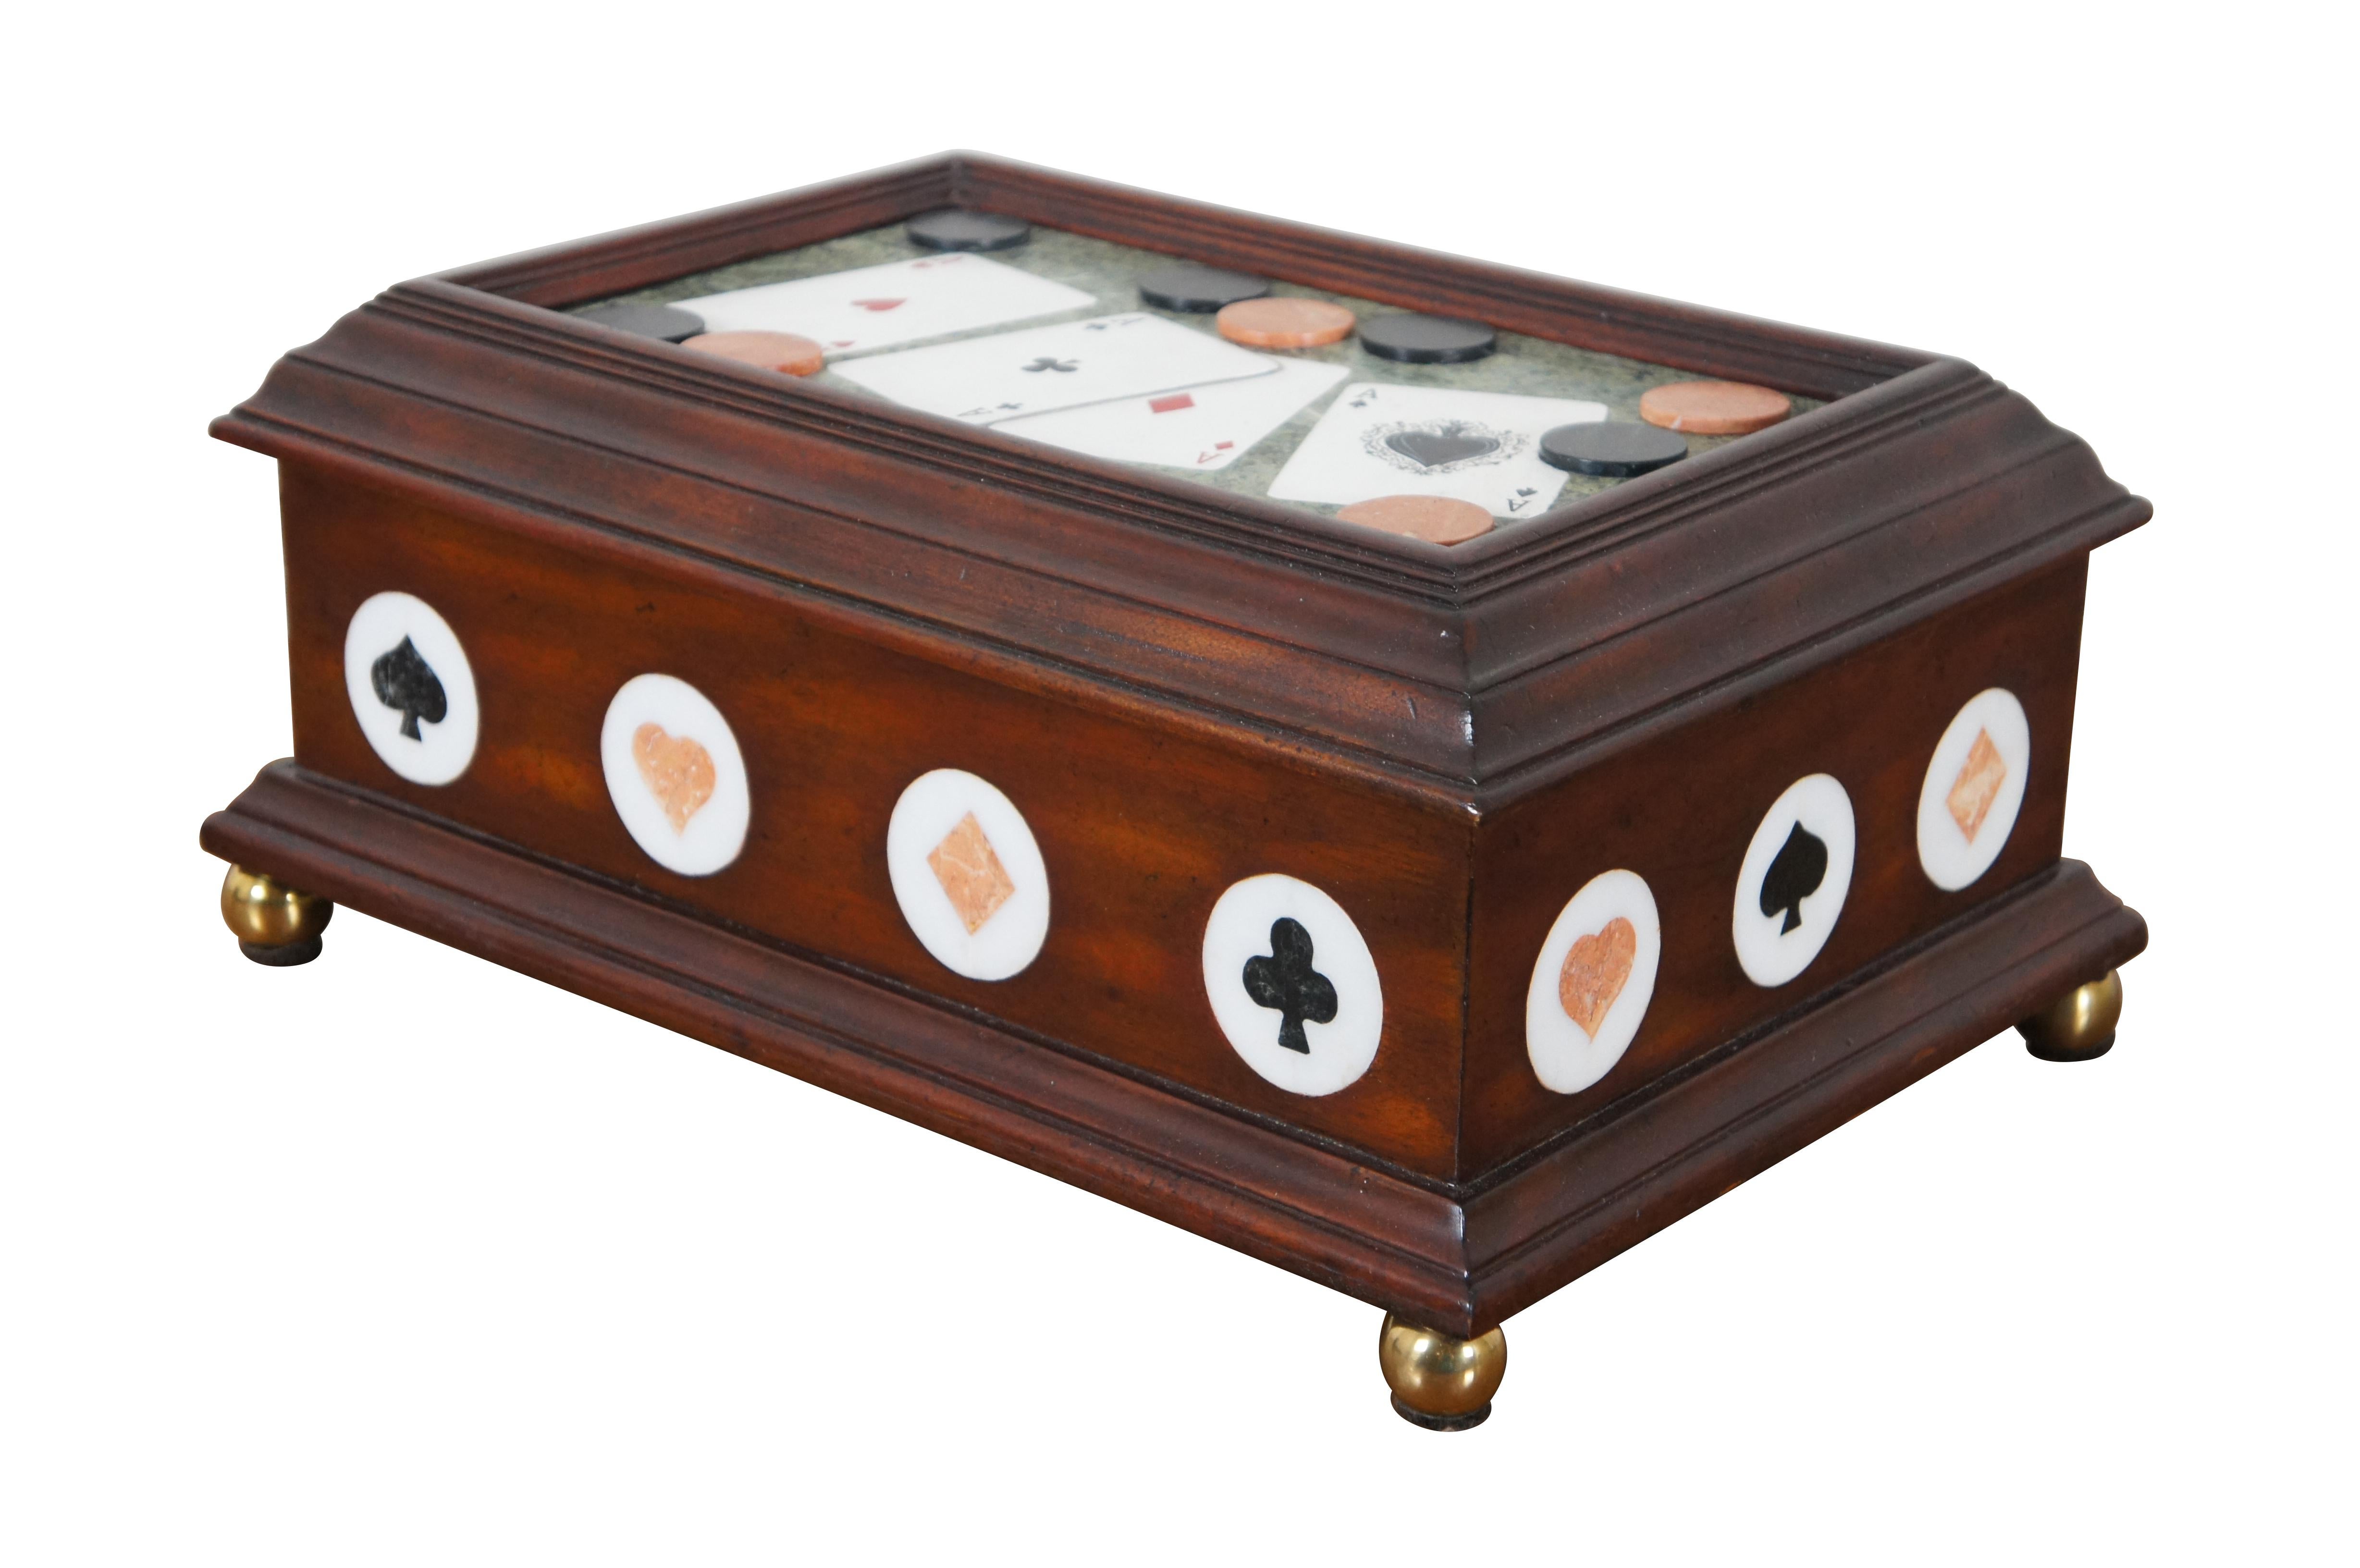 Vintage Maitland Smith trinket / keepsake / jewelry box / casket, crafted of mahogany with inlaid marble / stone details including the four playing card suits along each side and an inset three dimensional top showing four painted aces and a handful